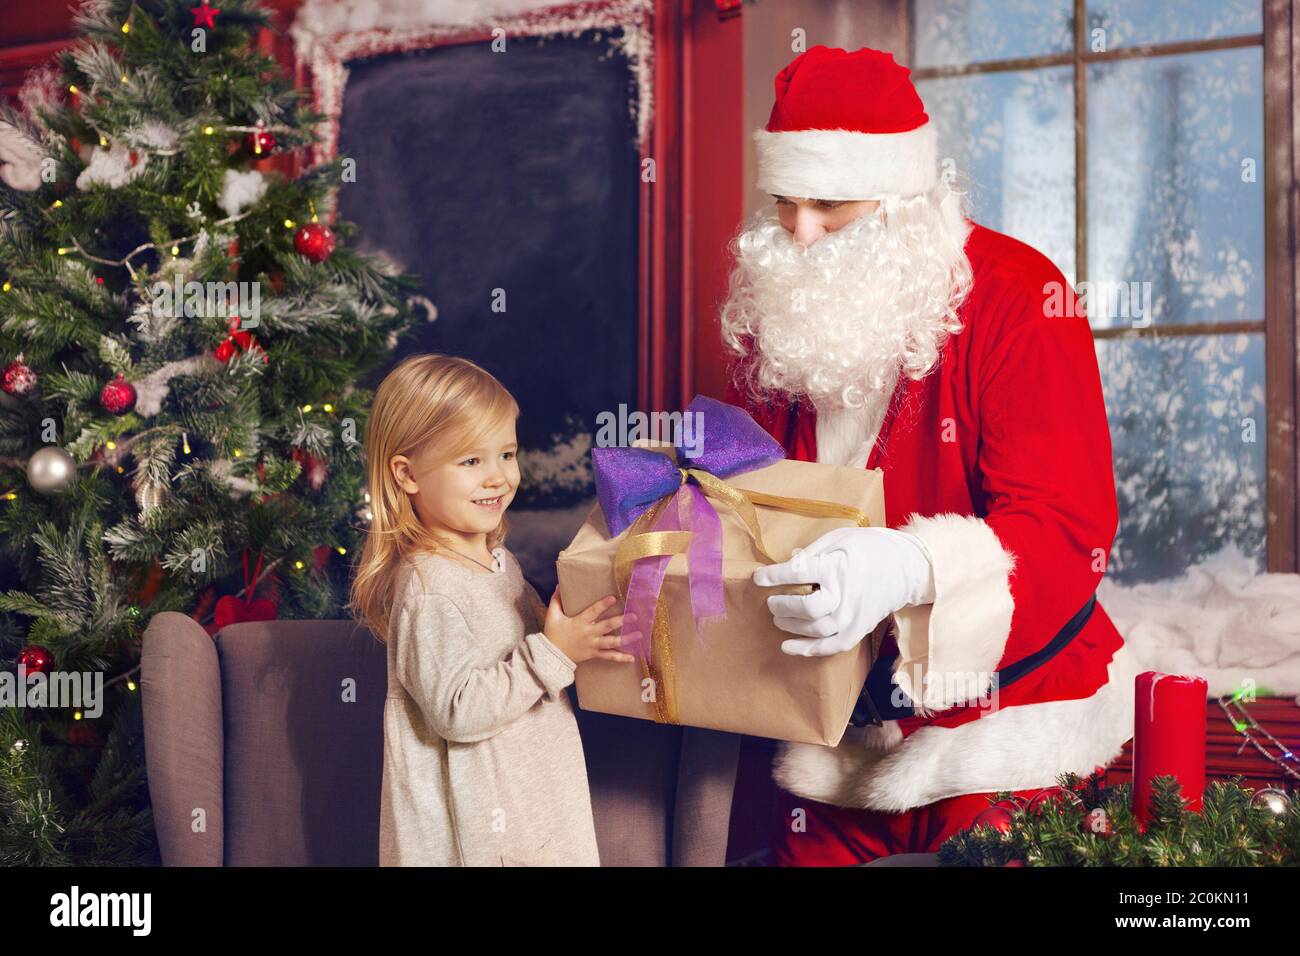 Smiling little girl with Santa Claus and gifts Stock Photo